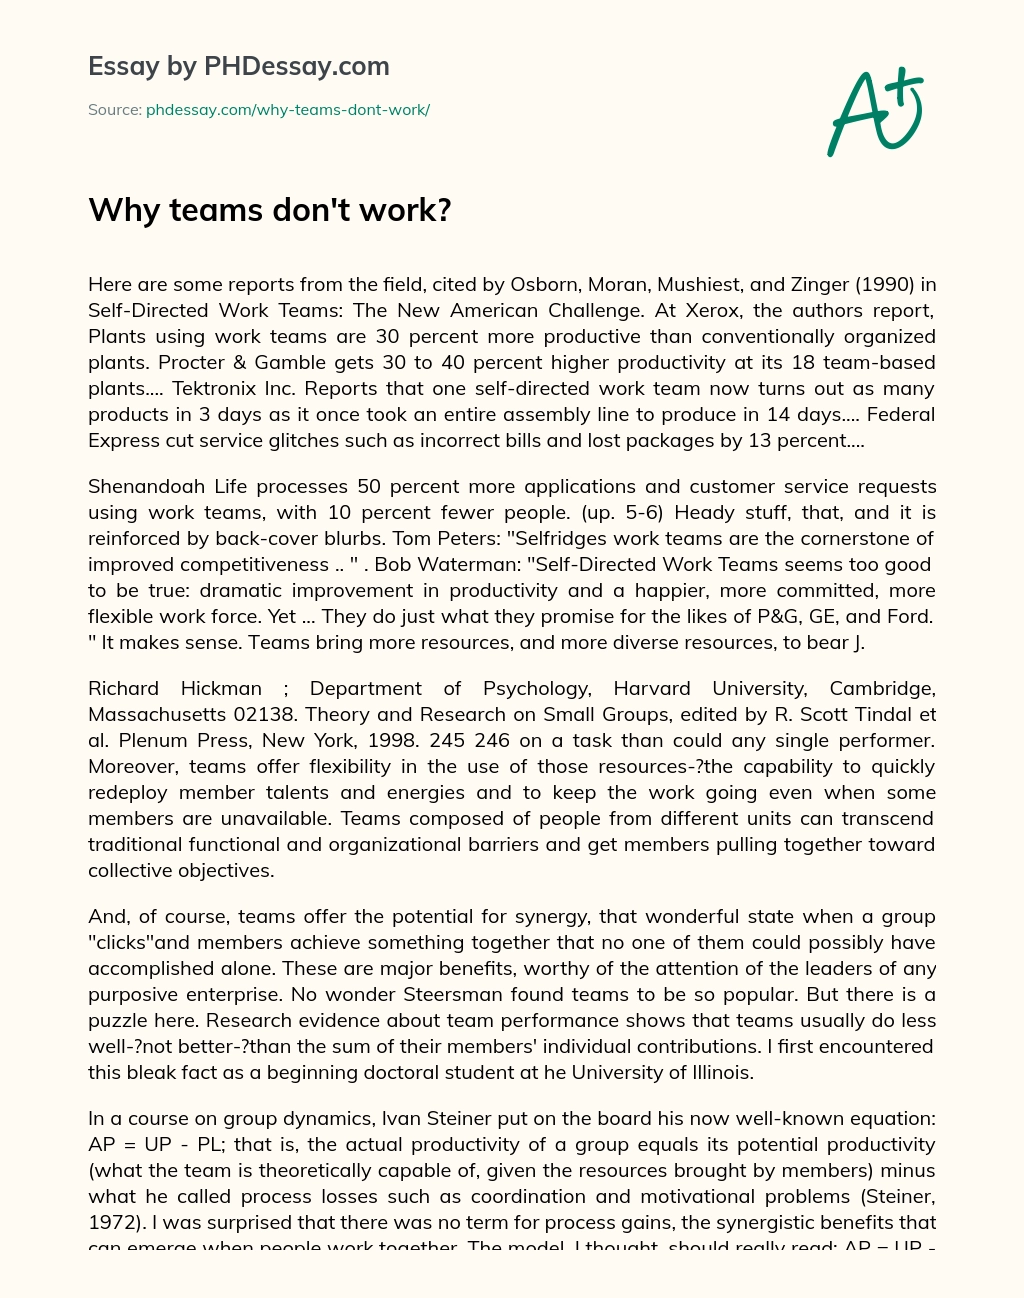 Why Teams Don’t Work? essay